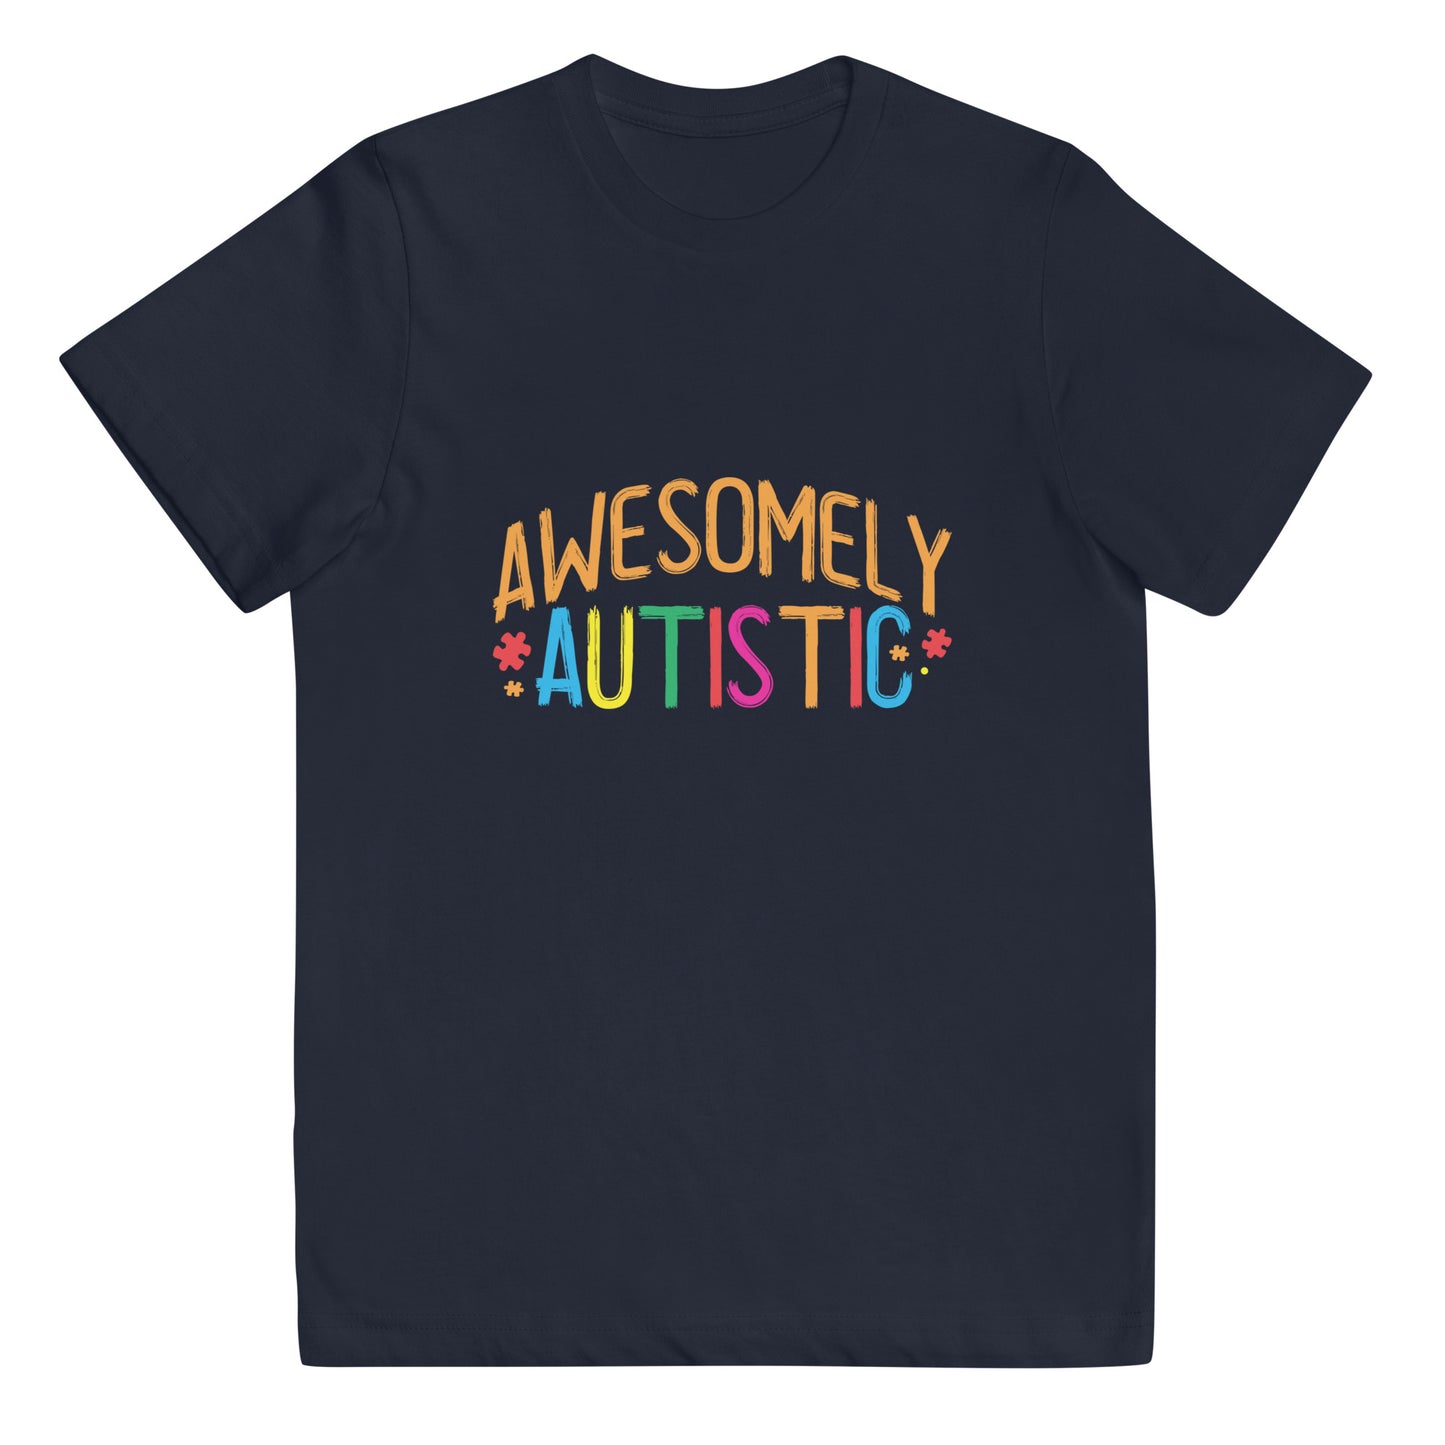 Awesomely Autistic Youth Tshirt